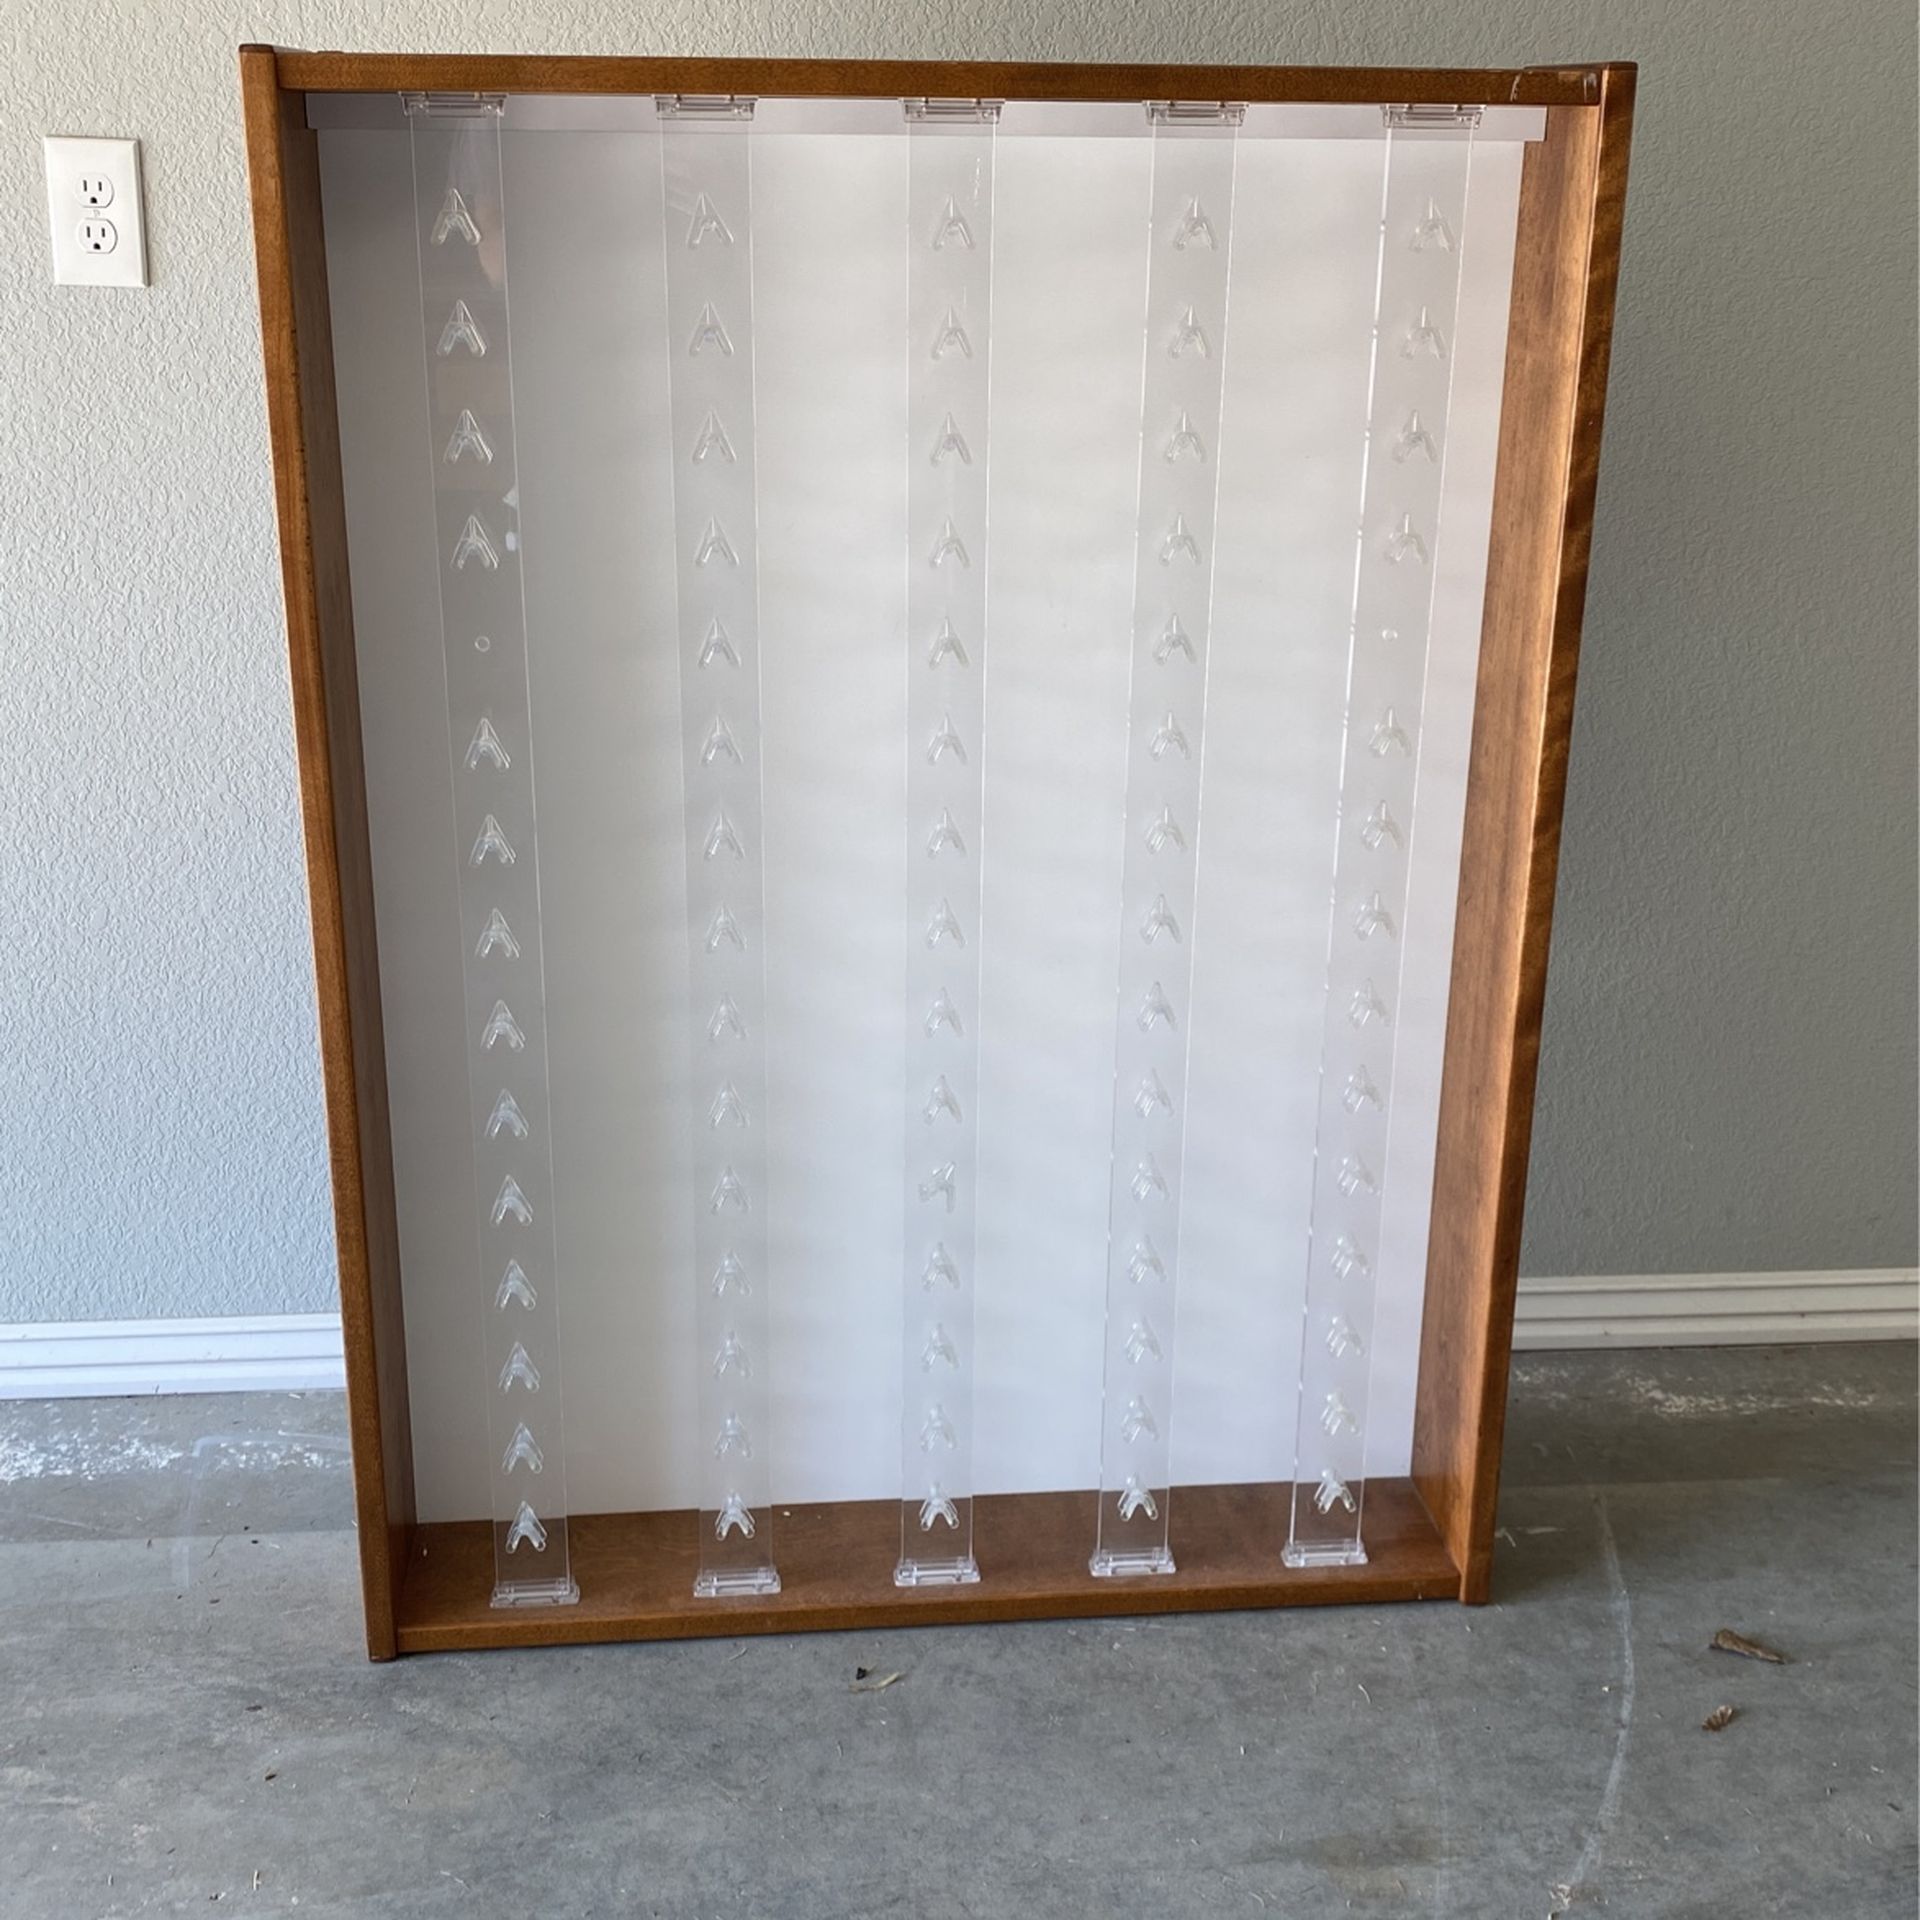 Display Case For Sunglasses